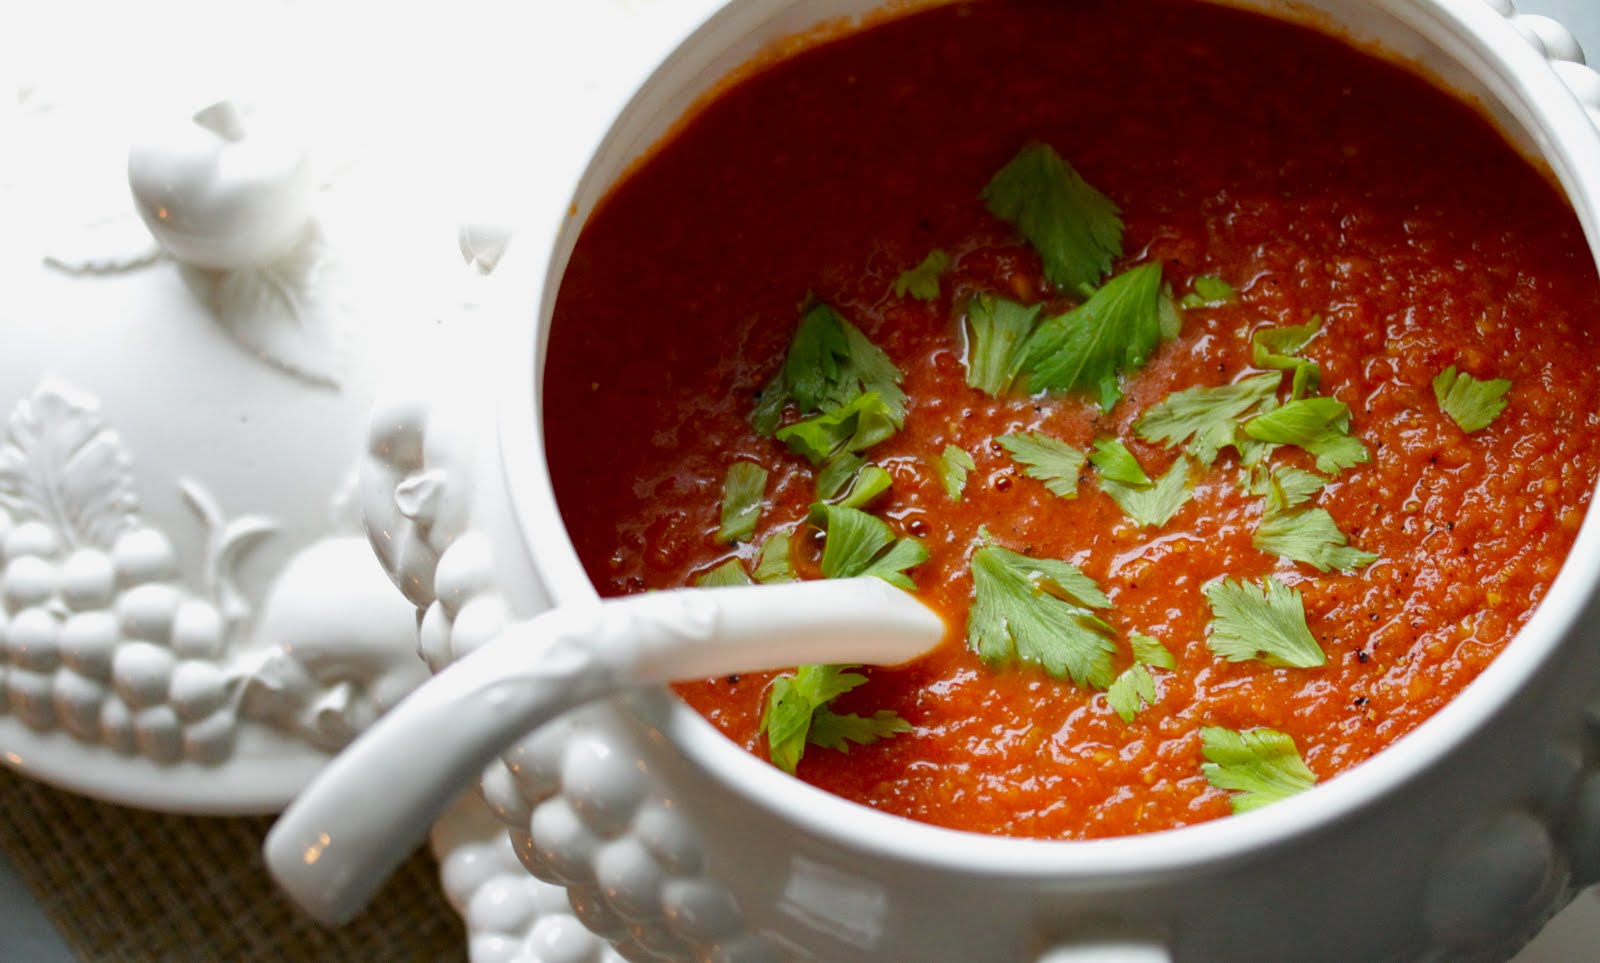 🌶 Spice up These Foods and We’ll Tell You What Color Empowers You tomato soup1